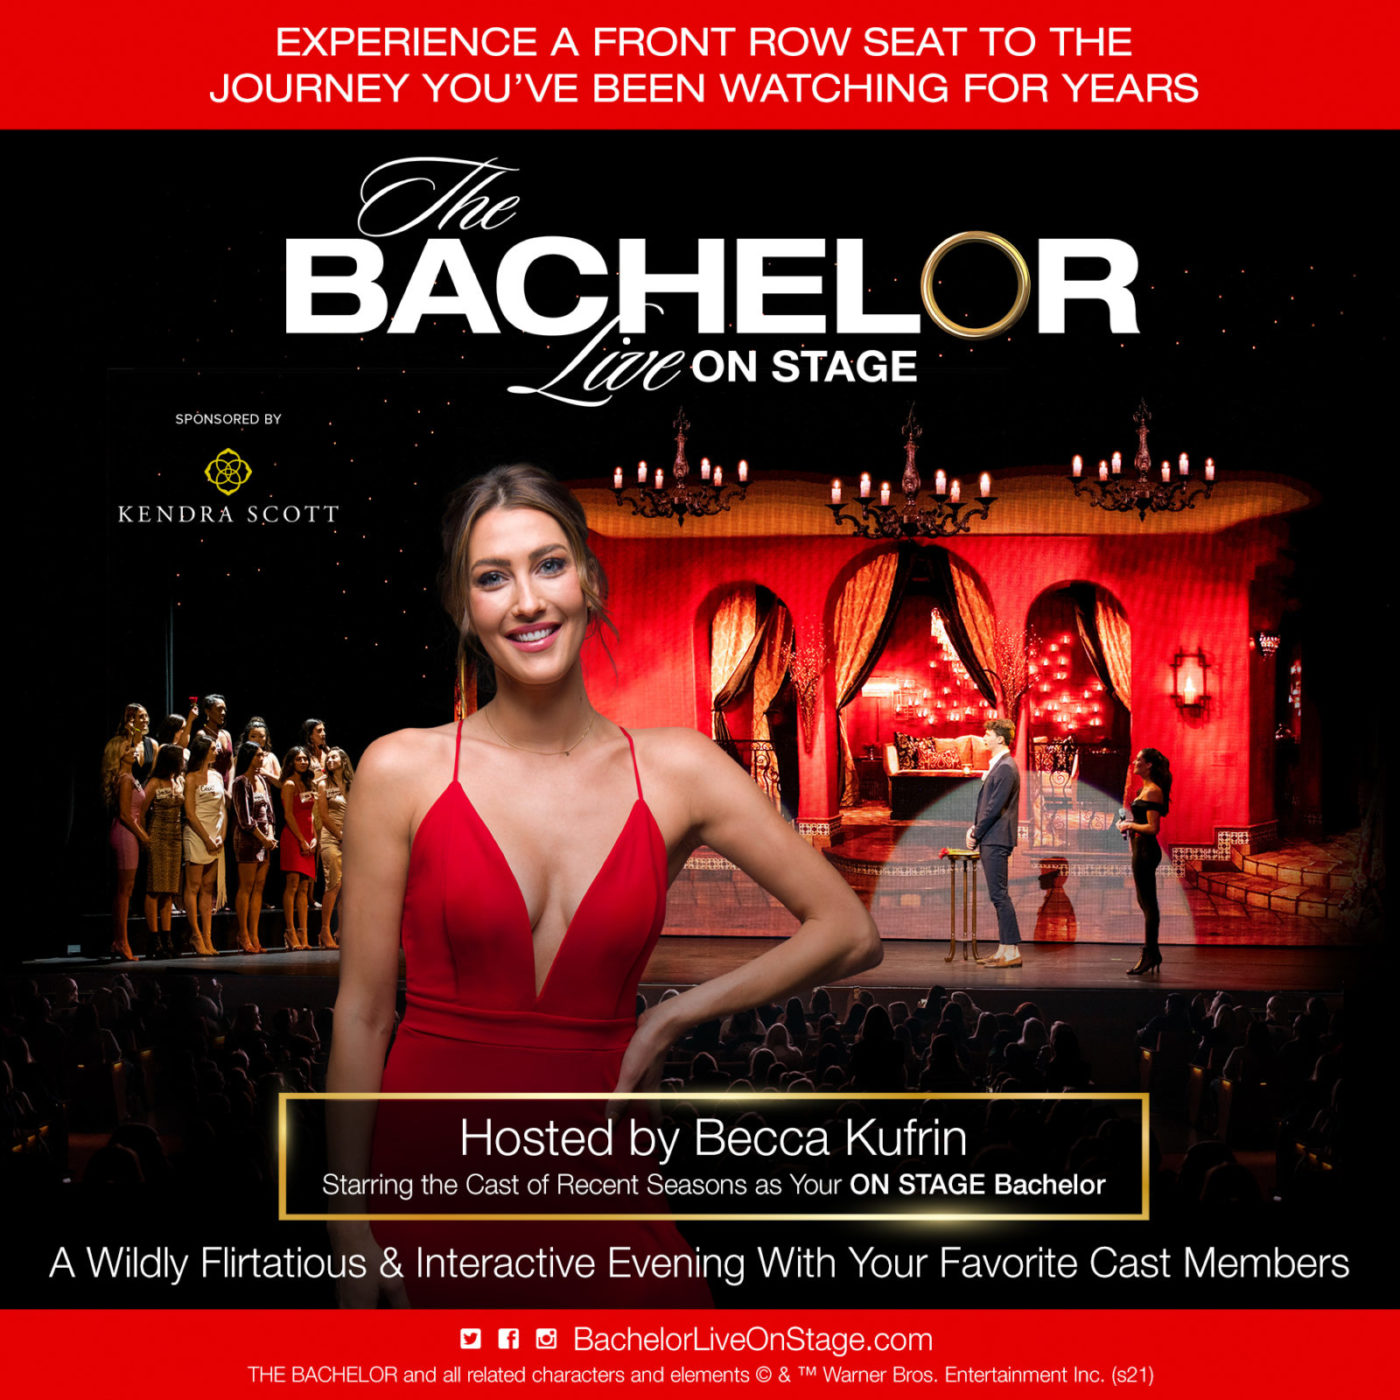 The Bachelor LIVE ON STAGE promo